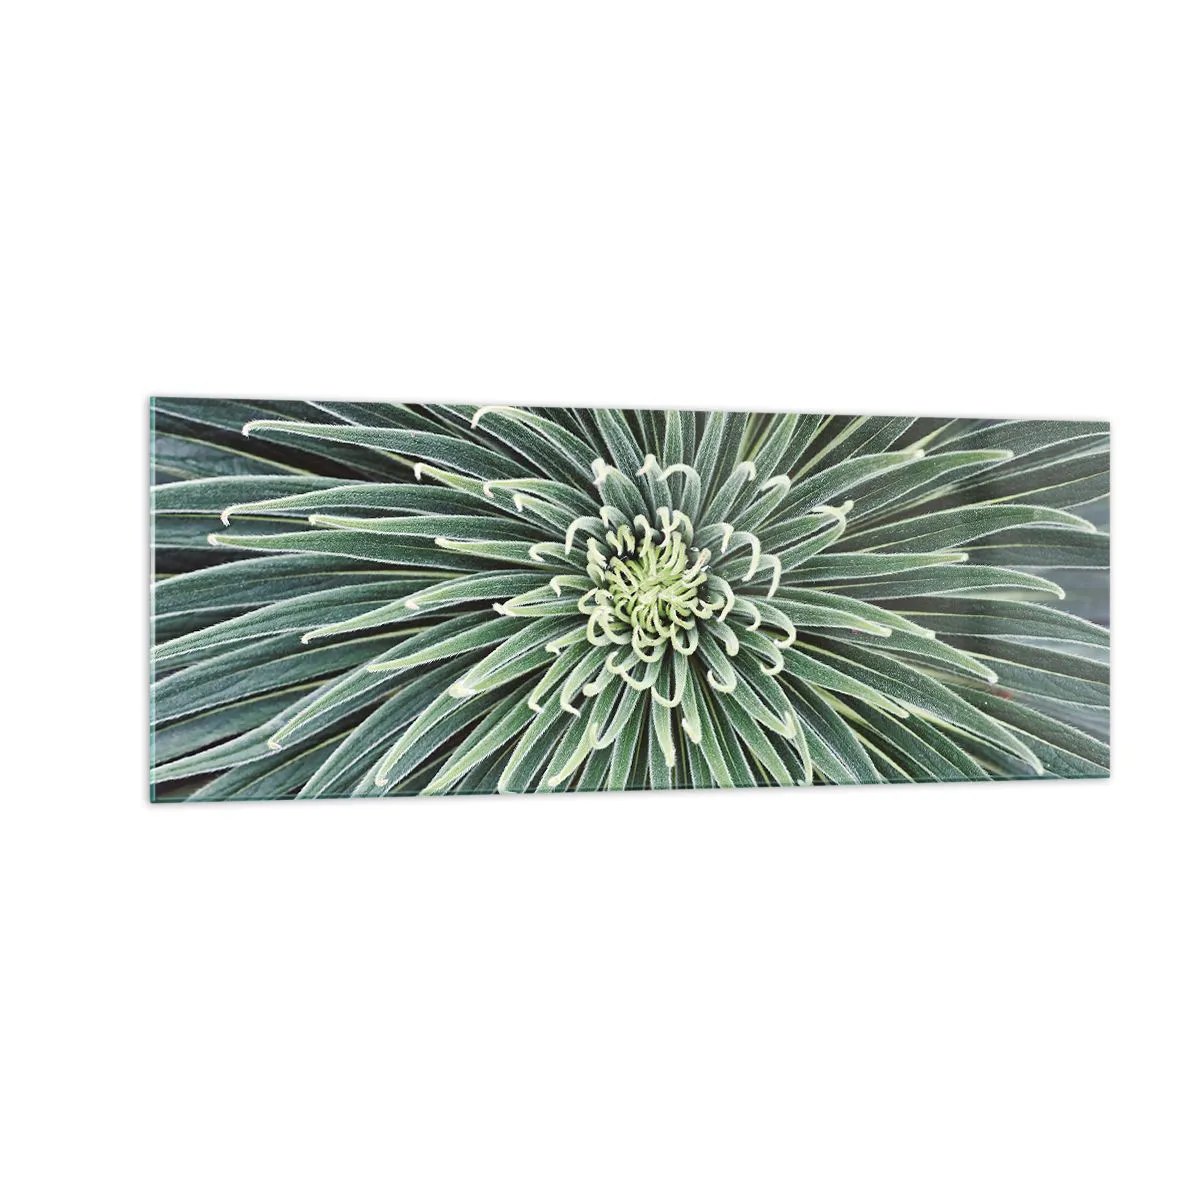 Glass picture  Arttor 140x50 cm - Birth of a Star - Agave Flower, Agave, Flowers, Tropics, Exotic, For living-room, For bedroom, Black, Green, Horizontal, Glass, GAB140x50-4905